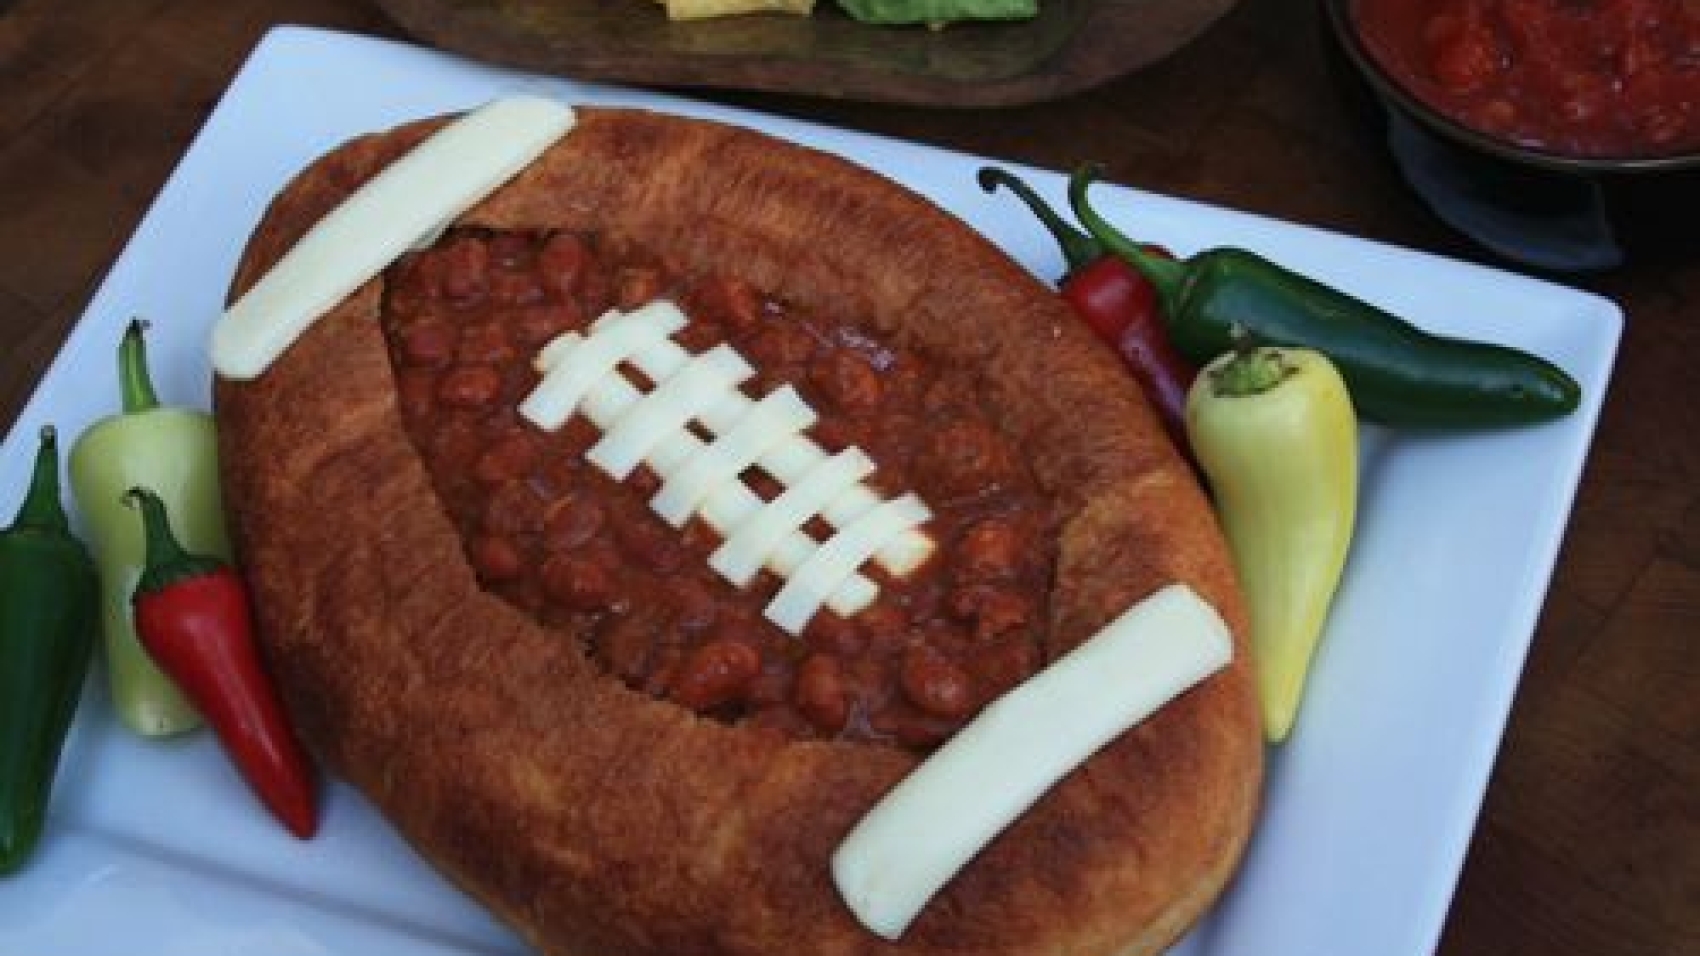 Krystal kinney Chili Recipe in Football Bread posted by Jeanne Benedict